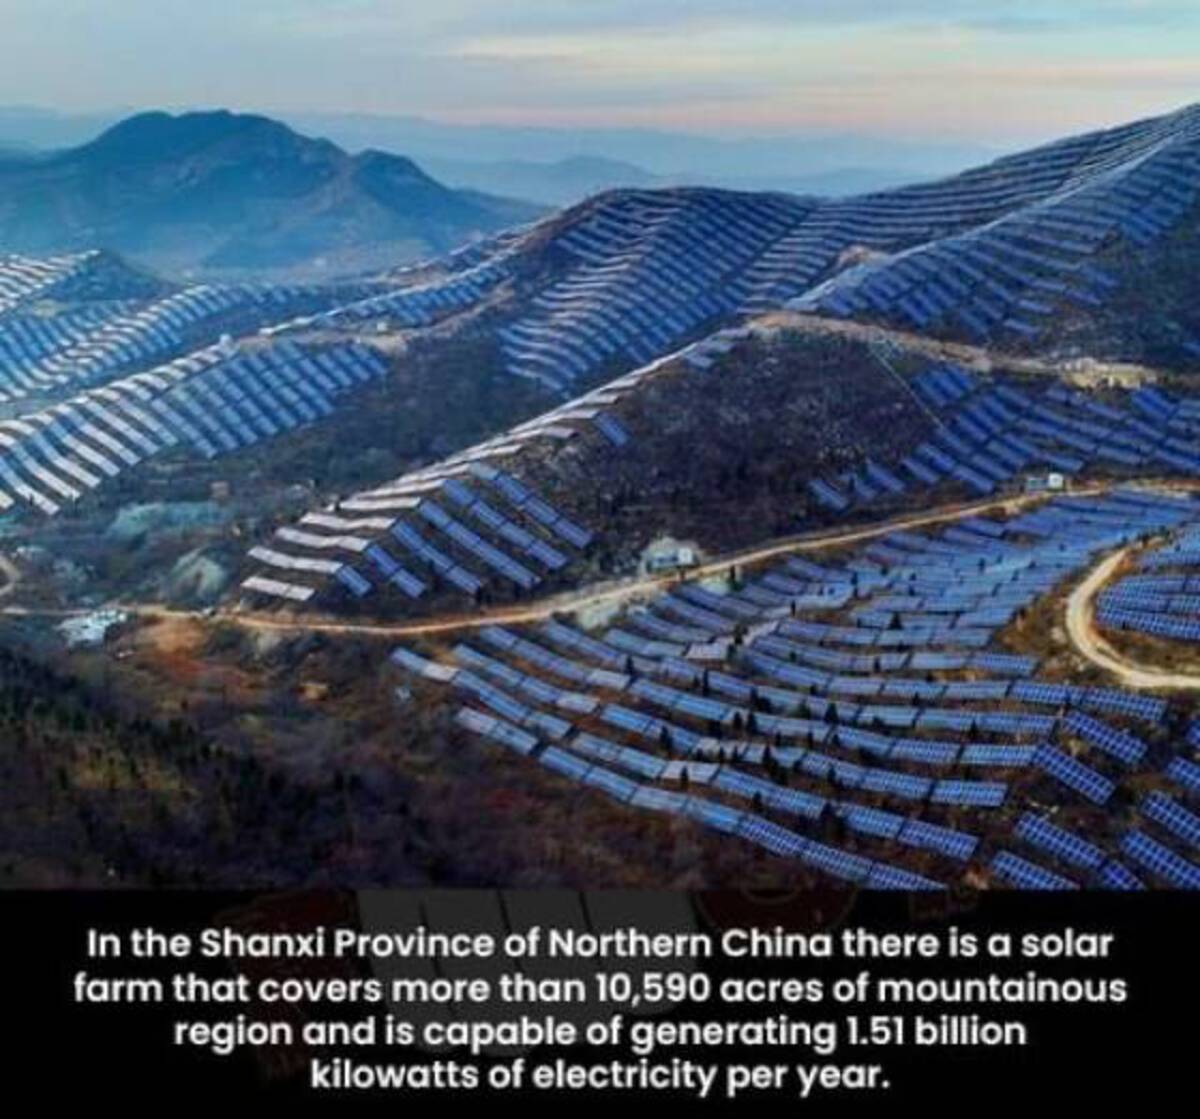 Hosph He In the Shanxi Province of Northern China there is a solar farm that covers more than 10,590 acres of mountainous region and is capable of generating 1.51 billion kilowatts of electricity per year.